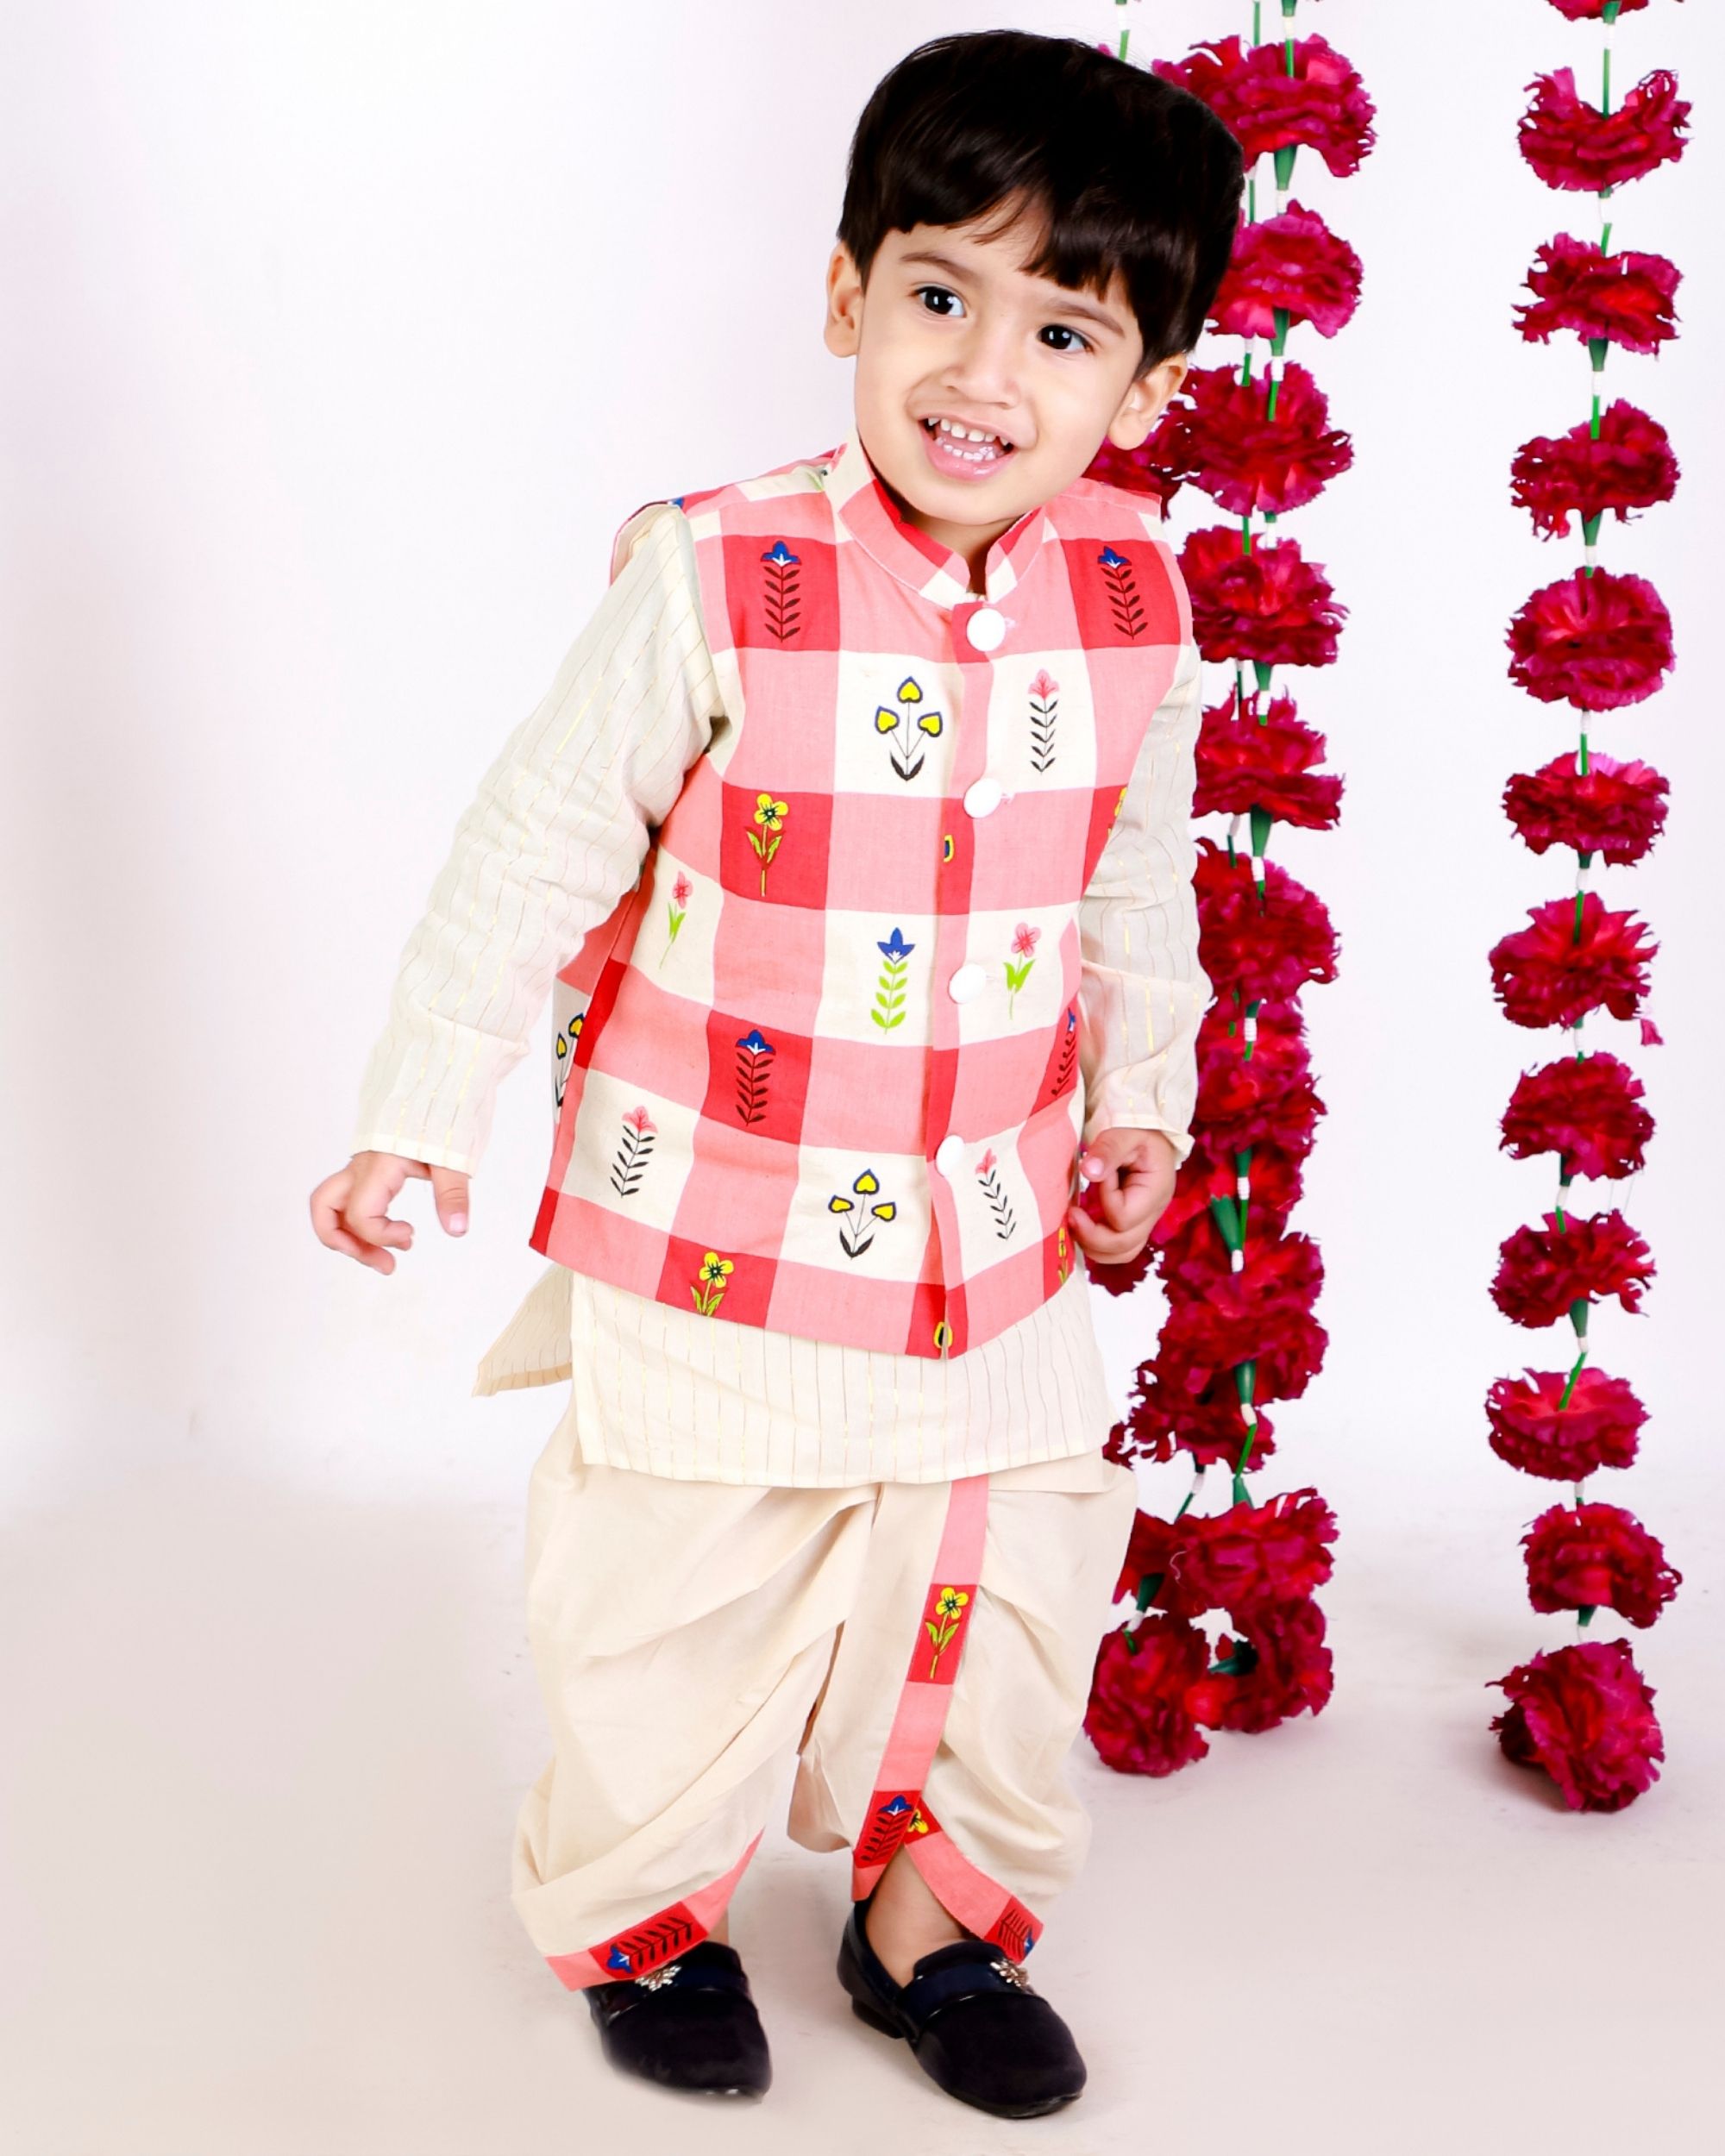 Cream and red floral check jacket with kurta and dhoti - set of three